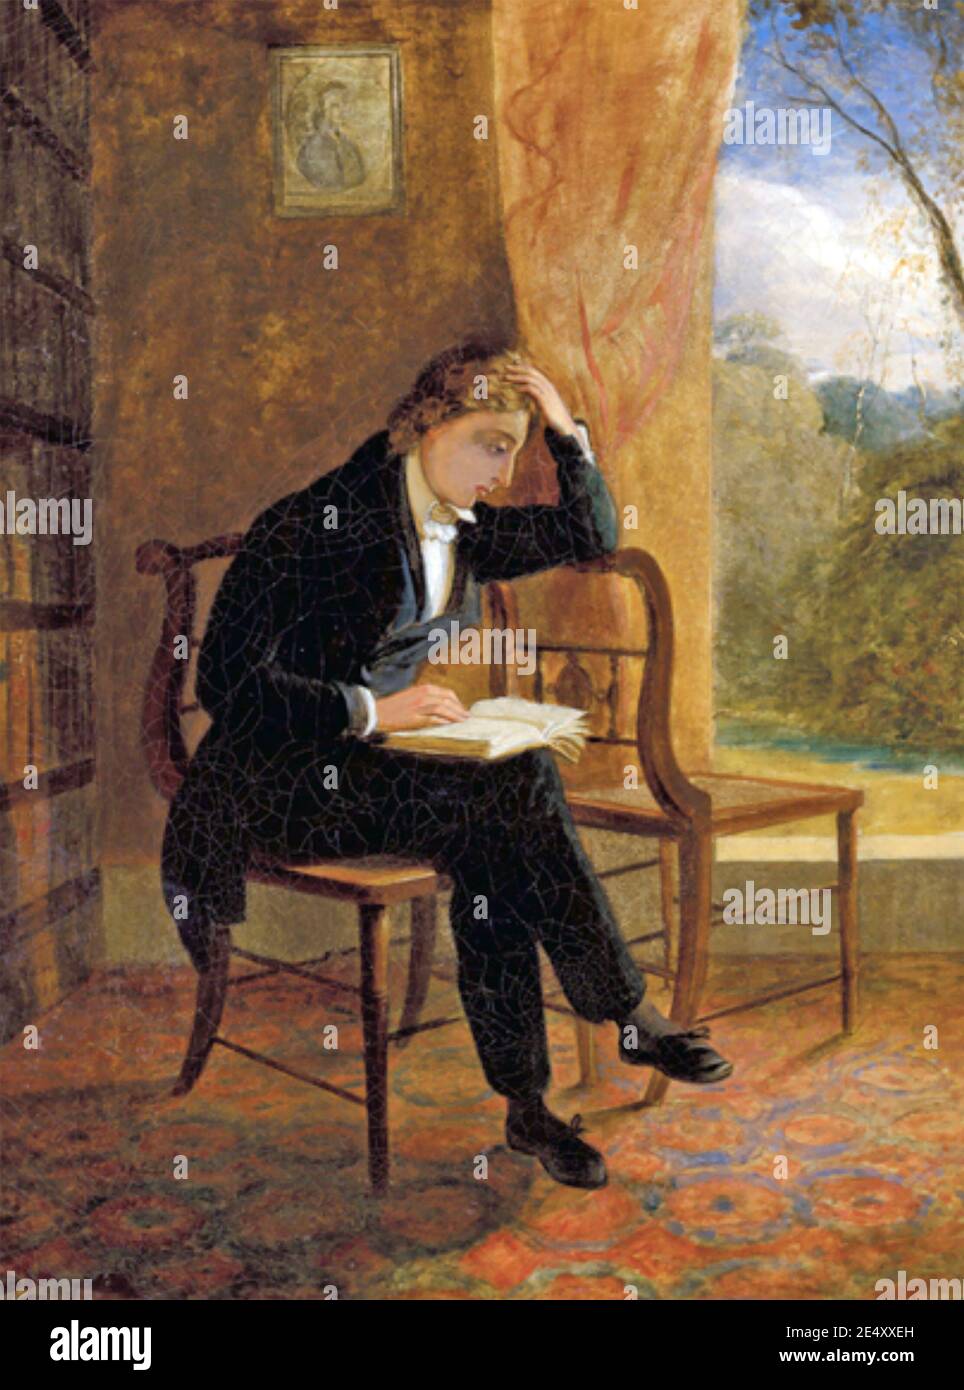 JOHN KEATS (1795-1821) English poet. Painting by Joseph Severn in 1834 entitled 'Portrait of John  Keats at Wentworth Place on the day of his composing Ode to a Nightingale' Stock Photo